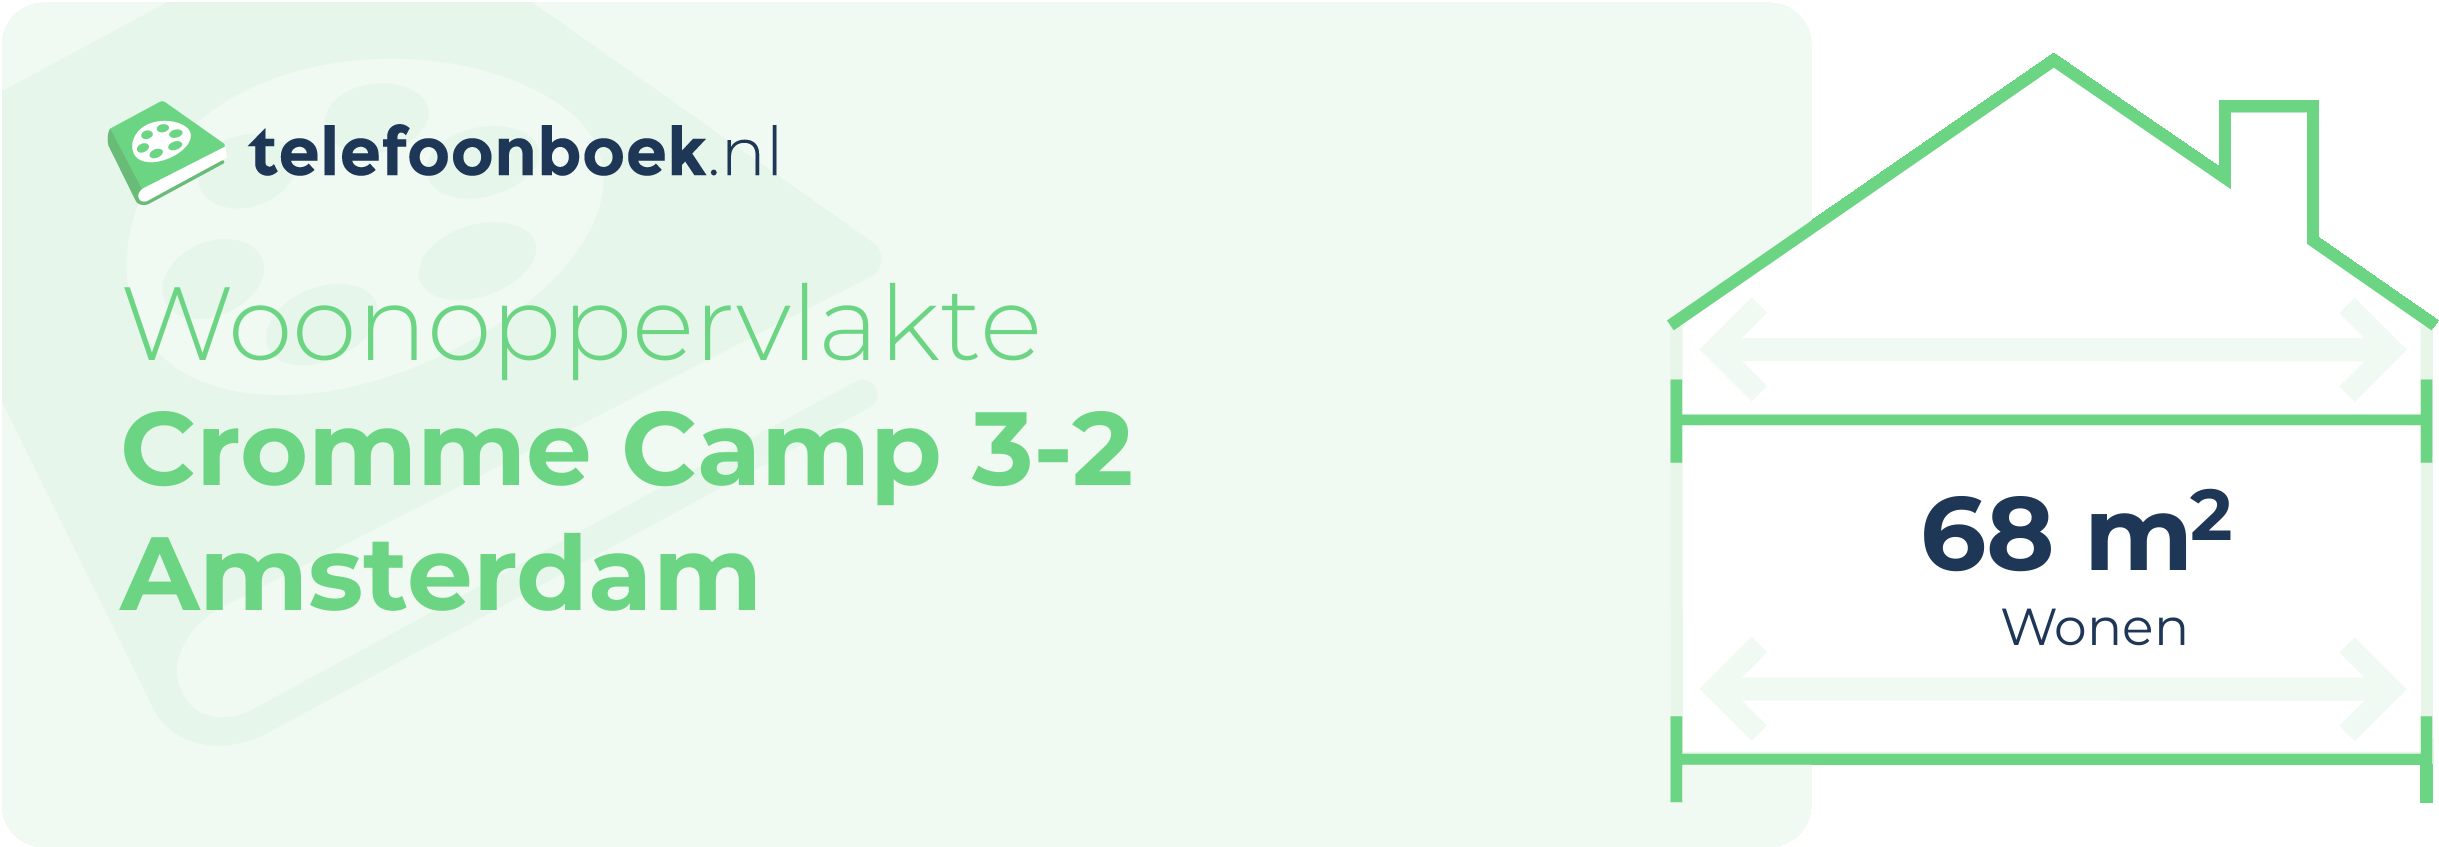 Woonoppervlakte Cromme Camp 3-2 Amsterdam